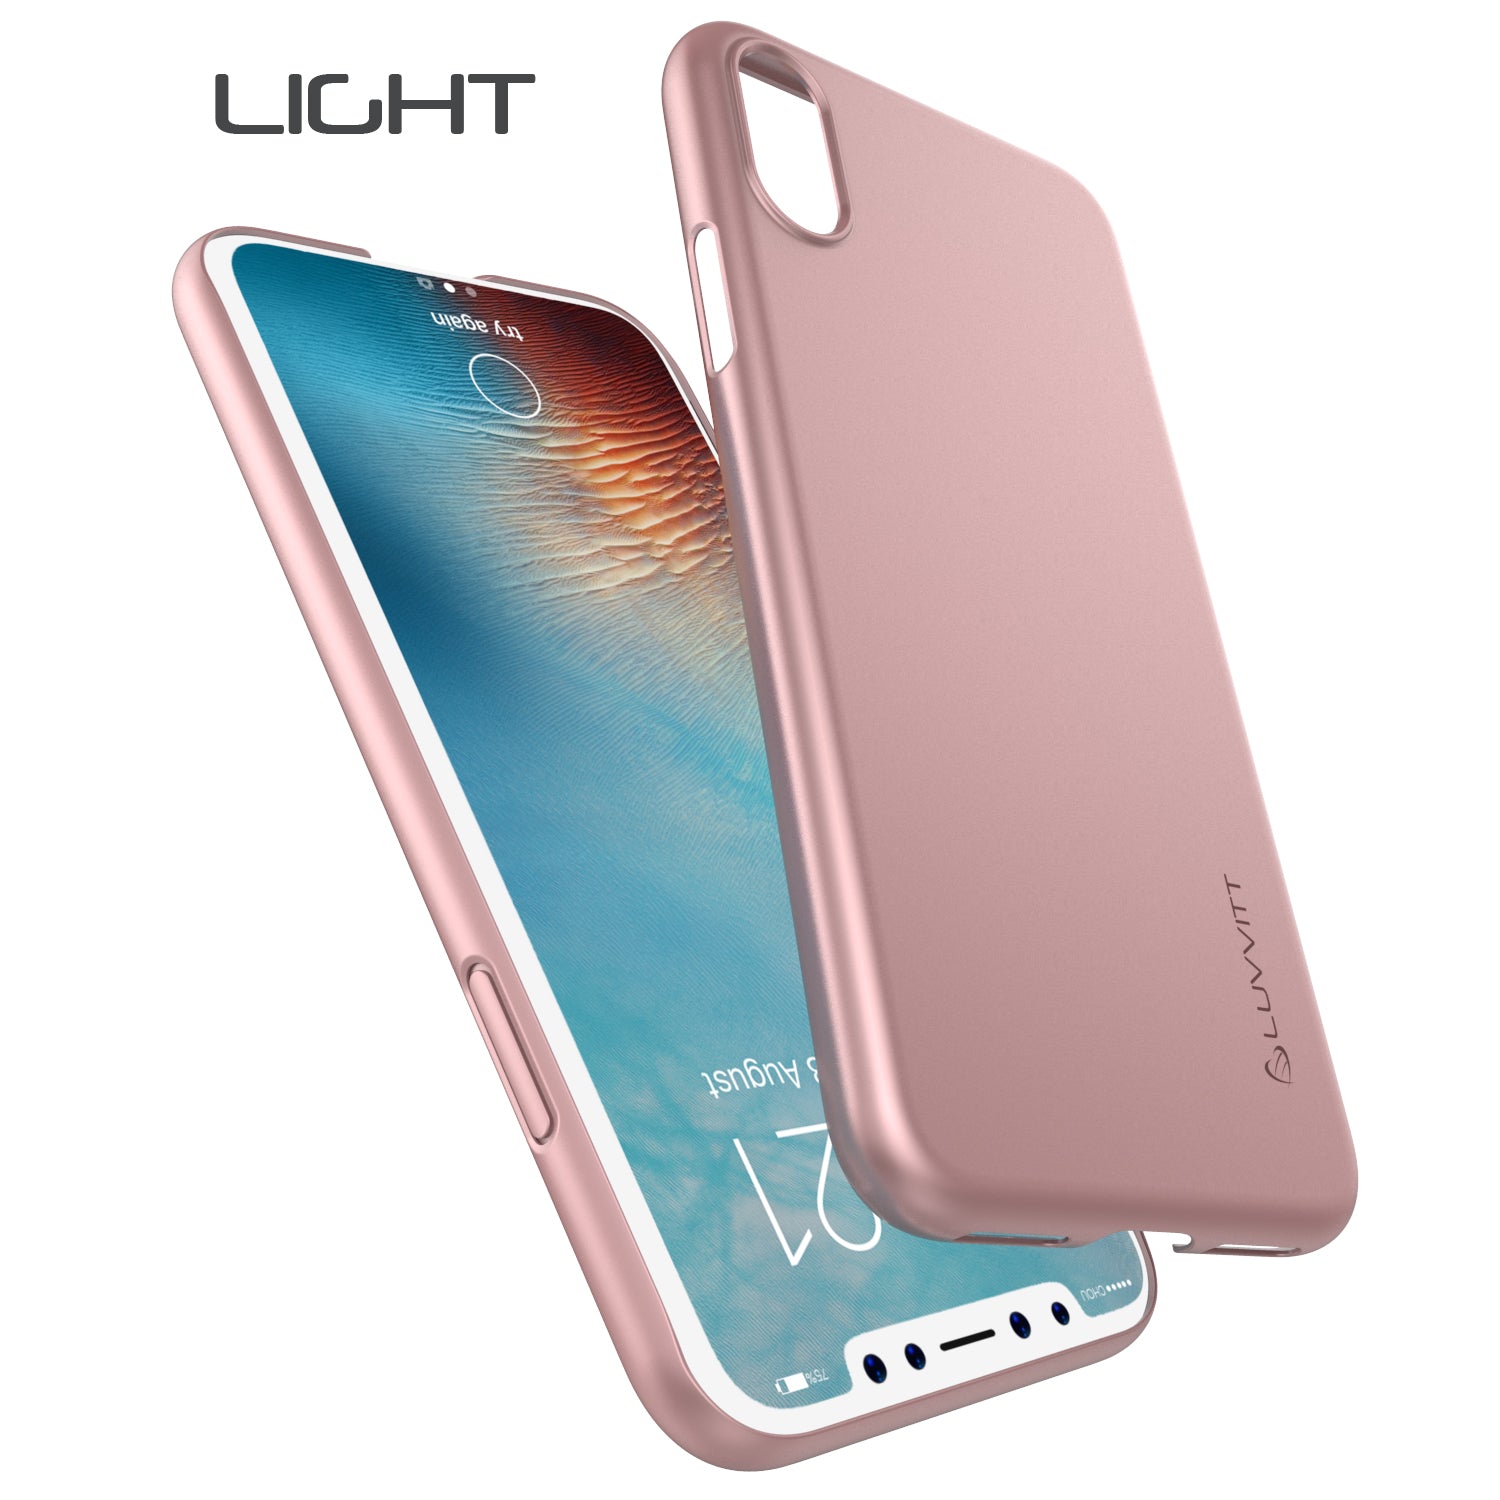 Luvvitt Svelte Slim Fit Hard Shell Case for iPhone XS / X - Rose Gold